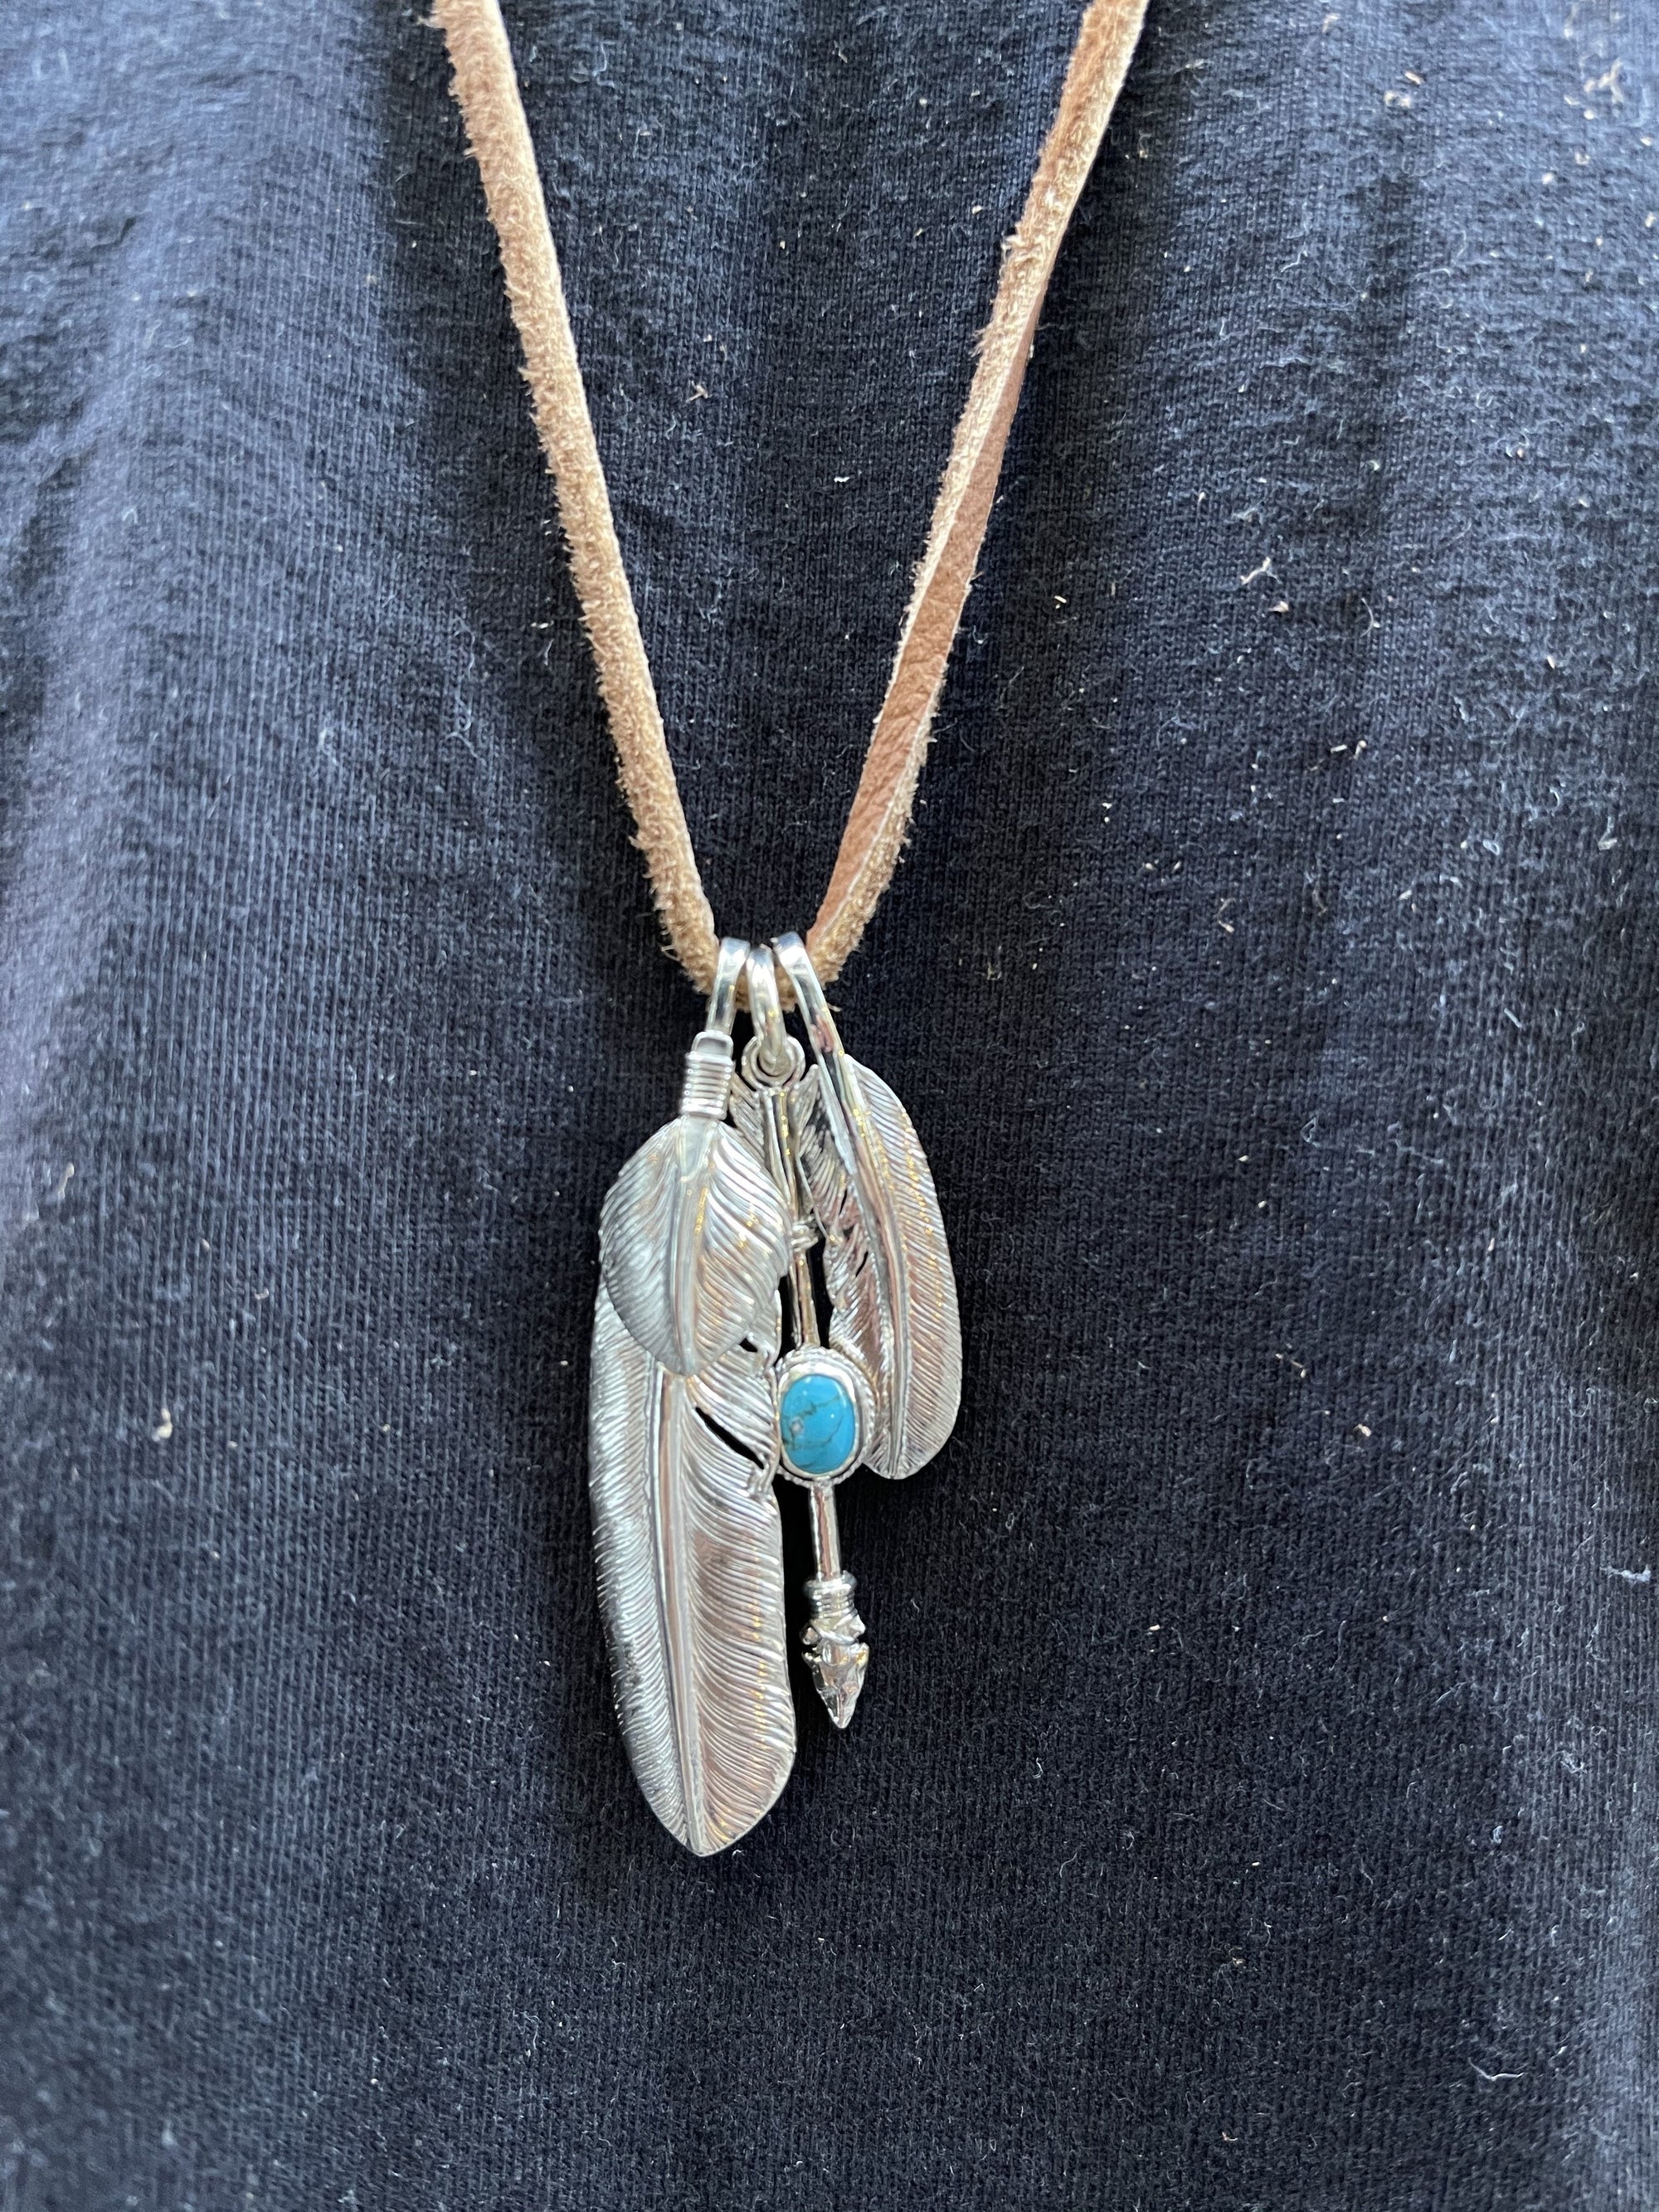 First Arrow's Size Medium "Arrow" Silver Pendant with Turquoise Stone (P-196)